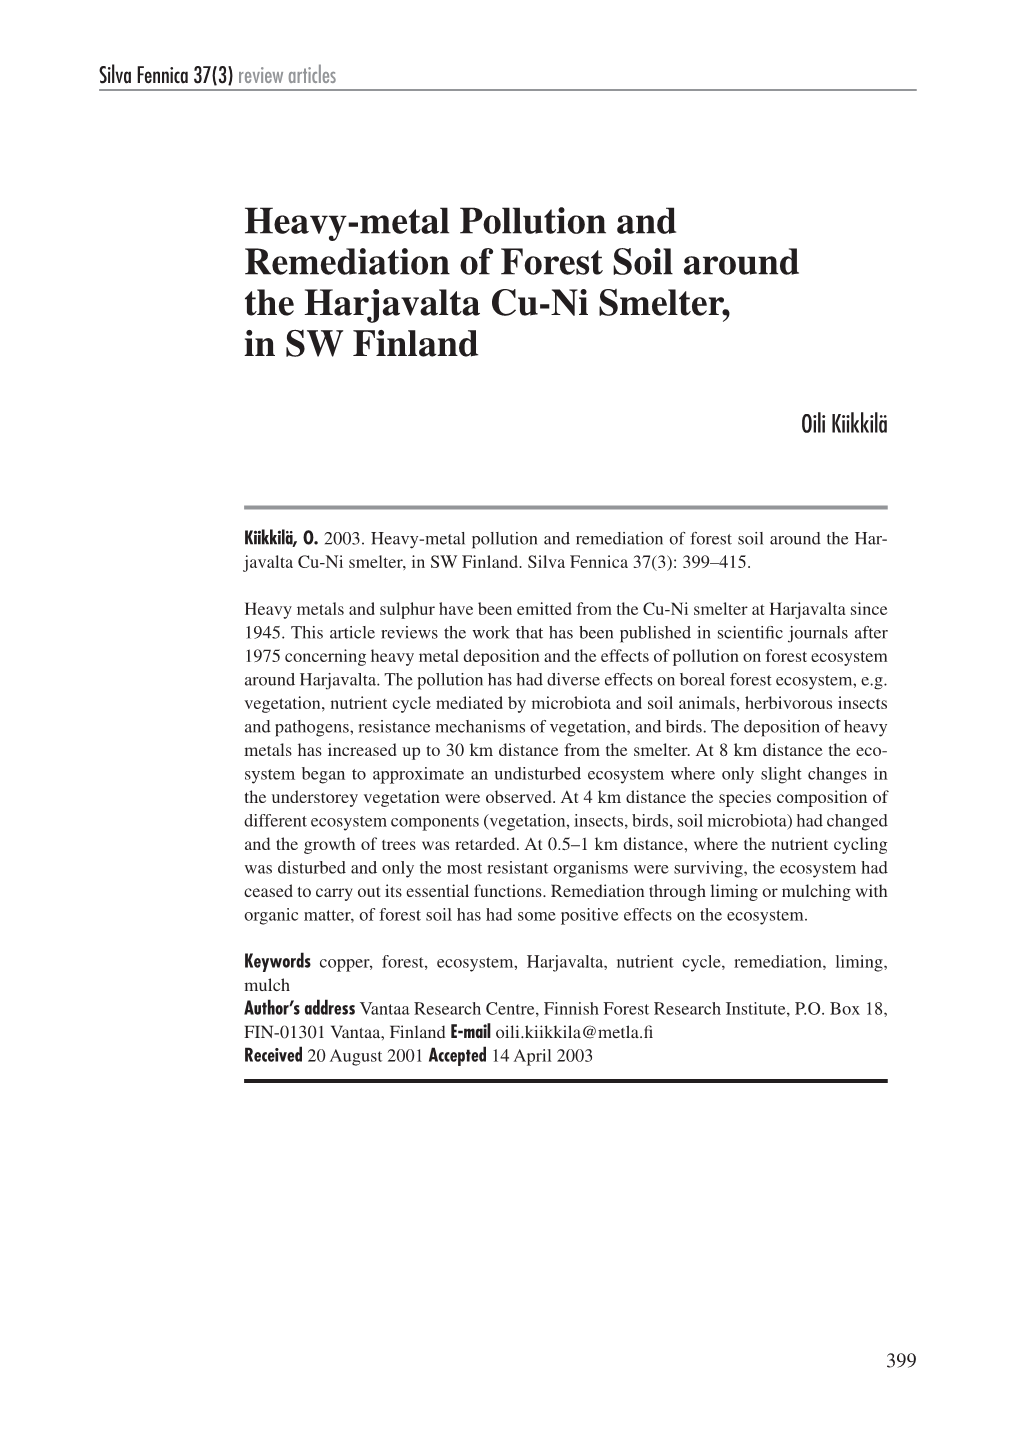 Heavy-Metal Pollution and Remediation of Forest Soil Around the Harjavalta Cu-Ni Smelter, in SW Finland